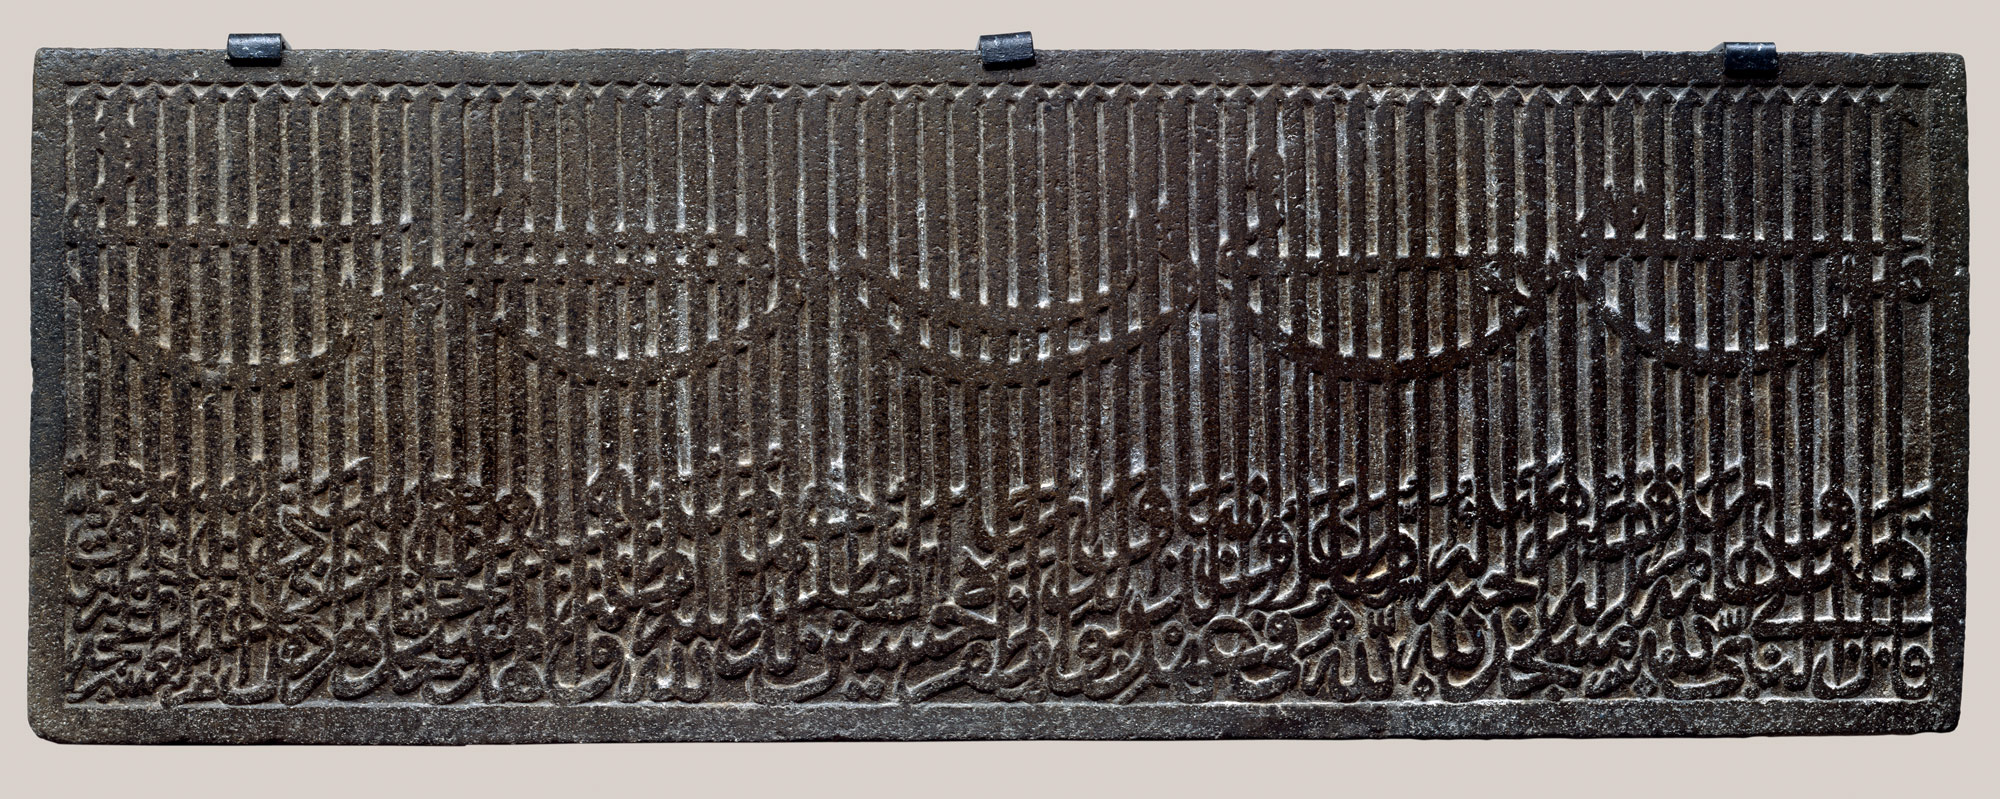 Dedicatory inscription from a mosque